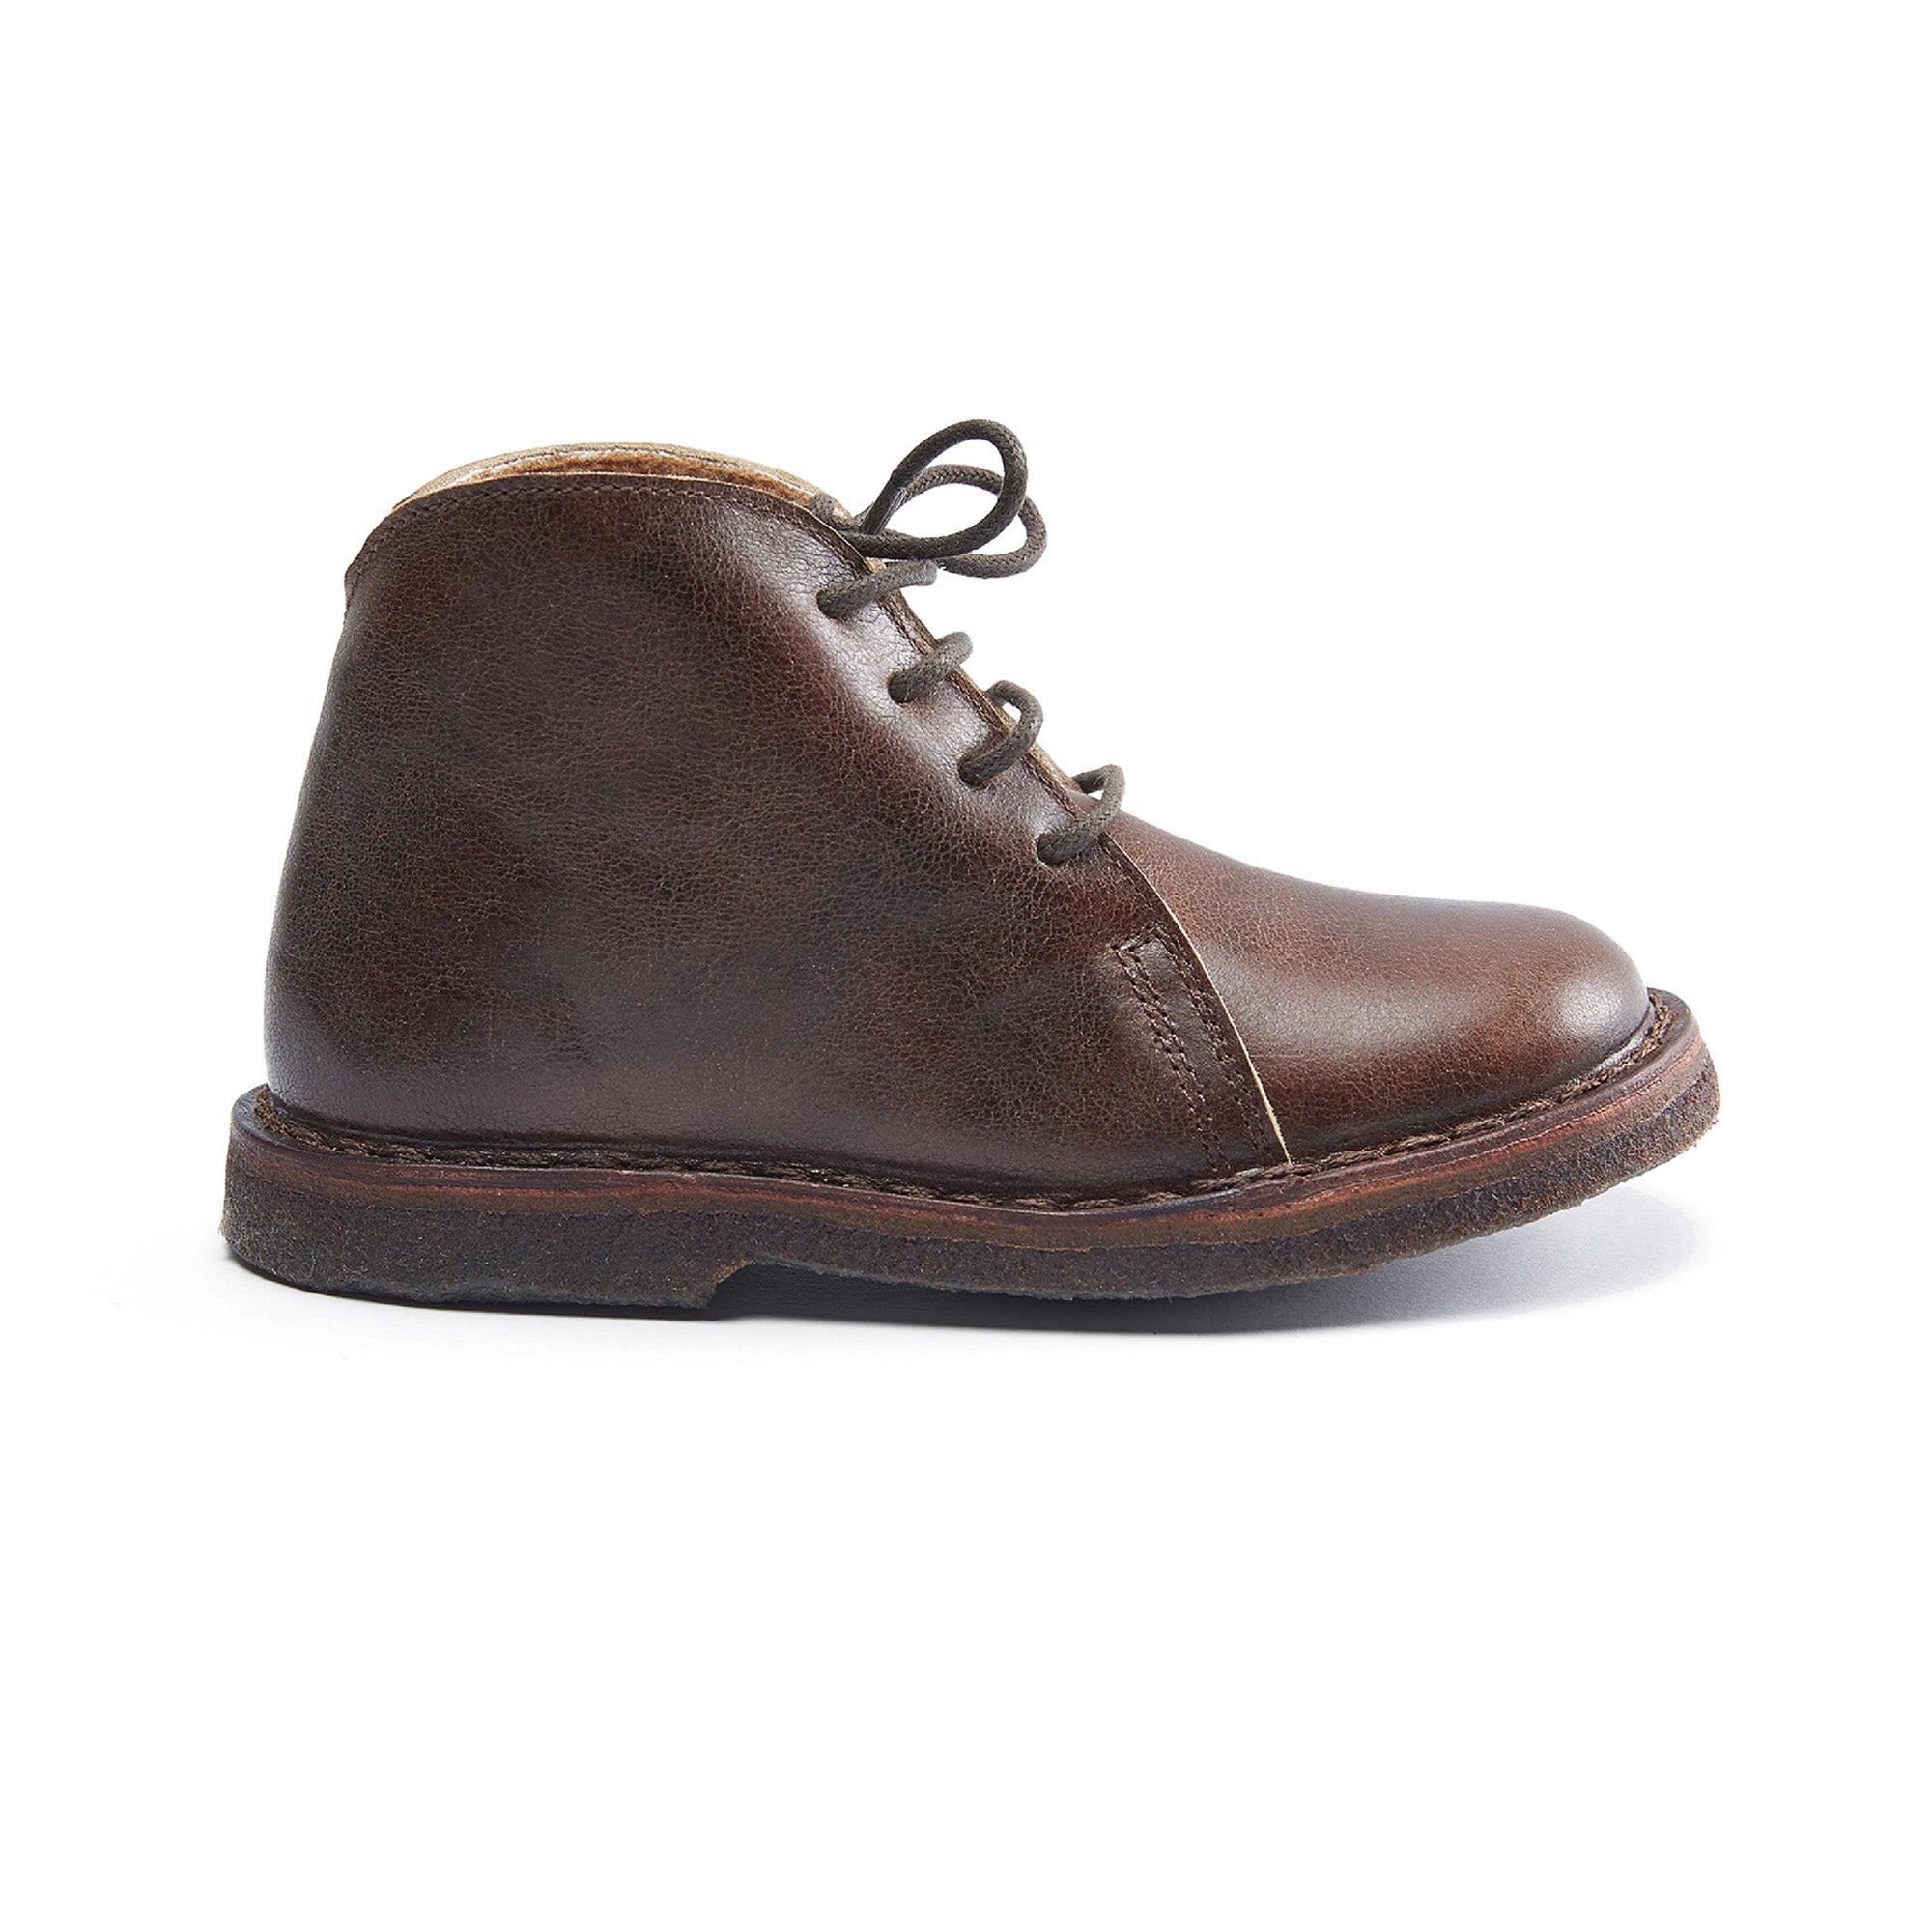 Boys & Girl Dark Brown Leather Shoes